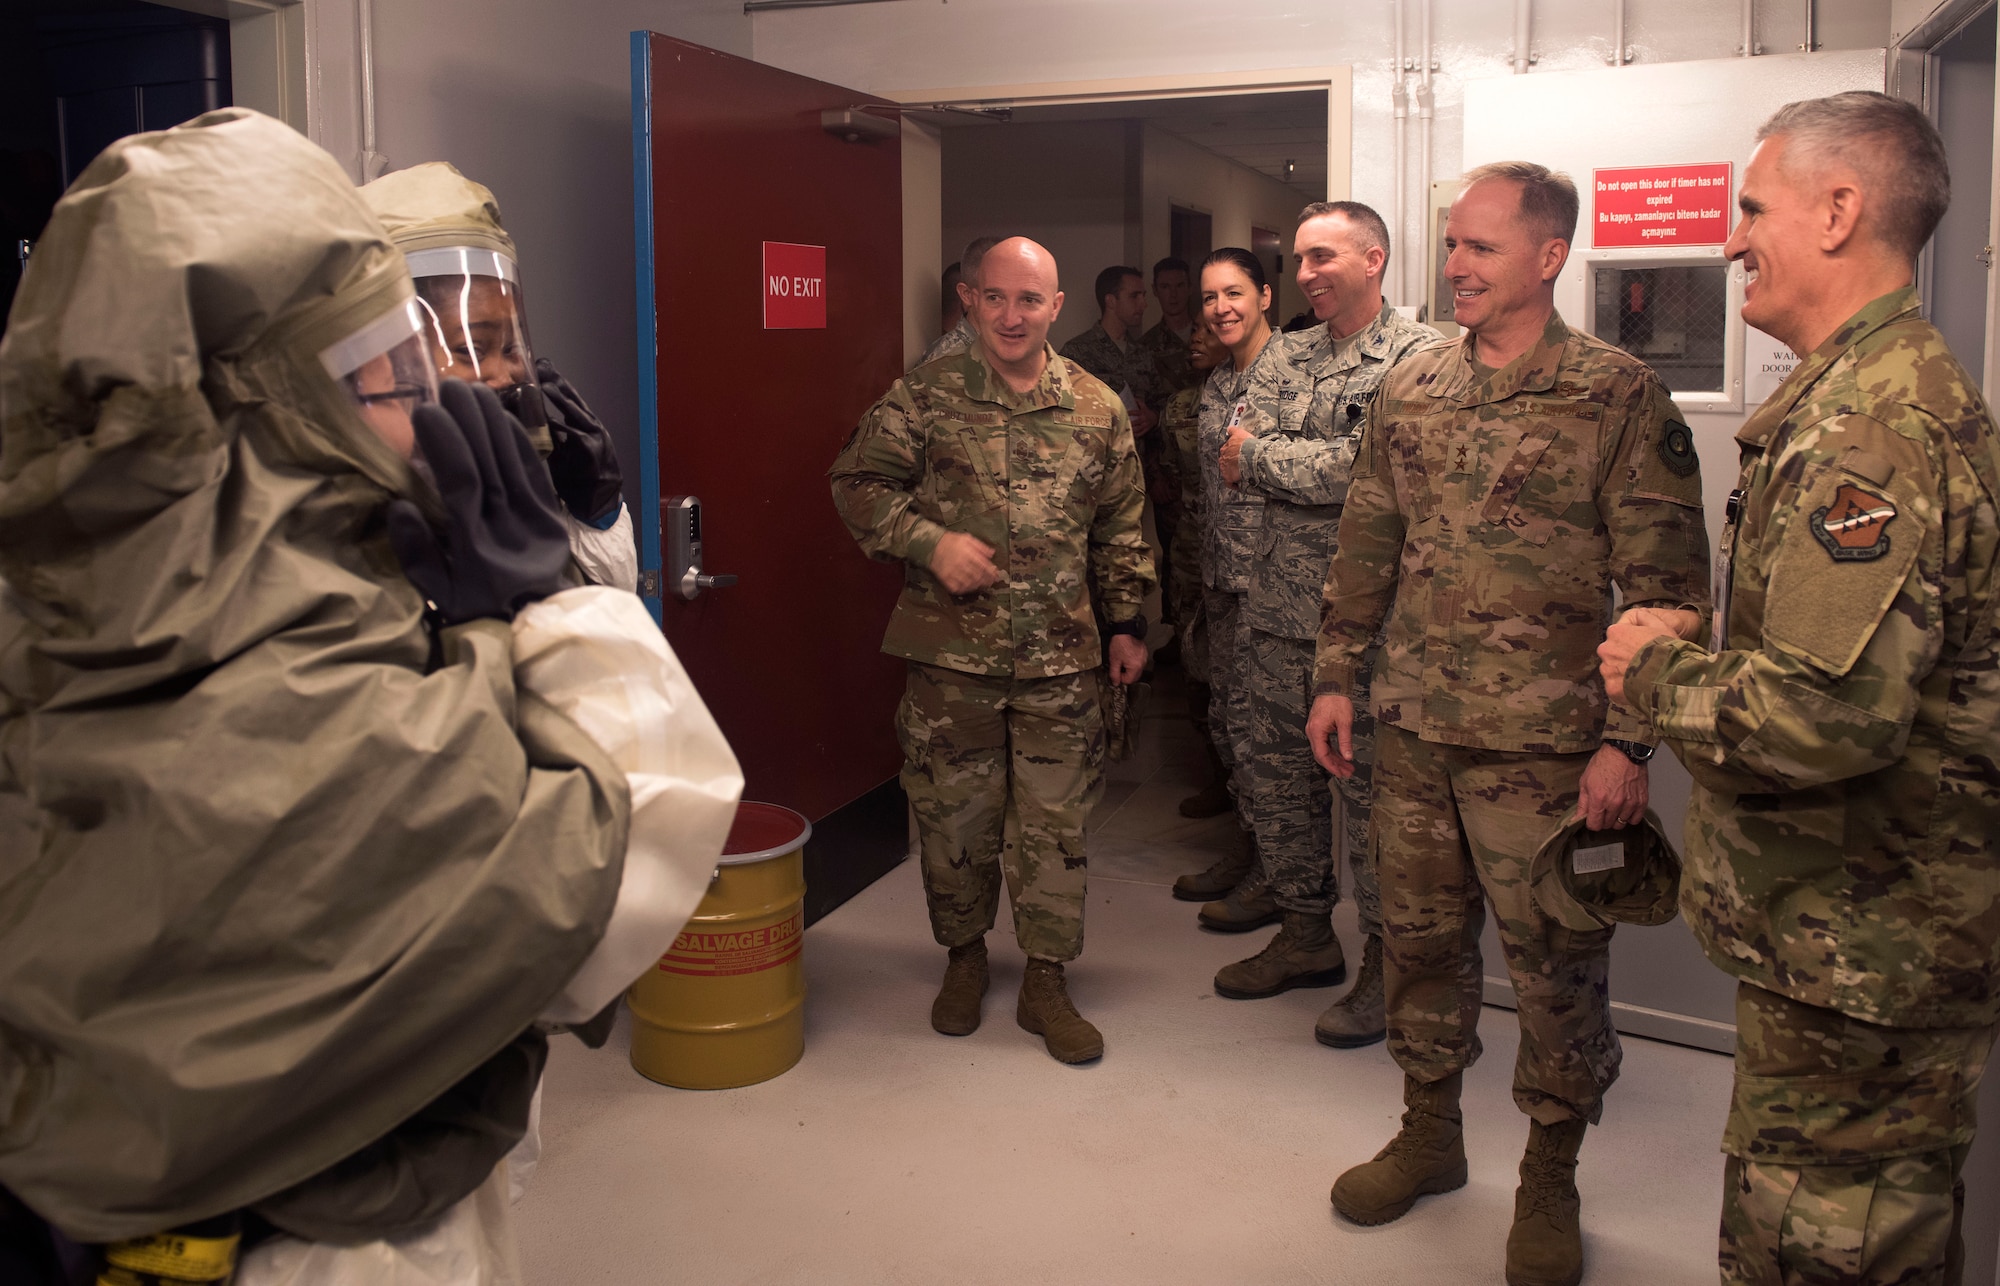 Airmen from the 39th Medical Group demonstrate decontamination suits and procedures during a familiarization briefing with U.S. Air Force Maj. Gen. John M. Wood, Third Air Force commander, at Incirlik Air Base, Turkey, Feb. 22, 2019.